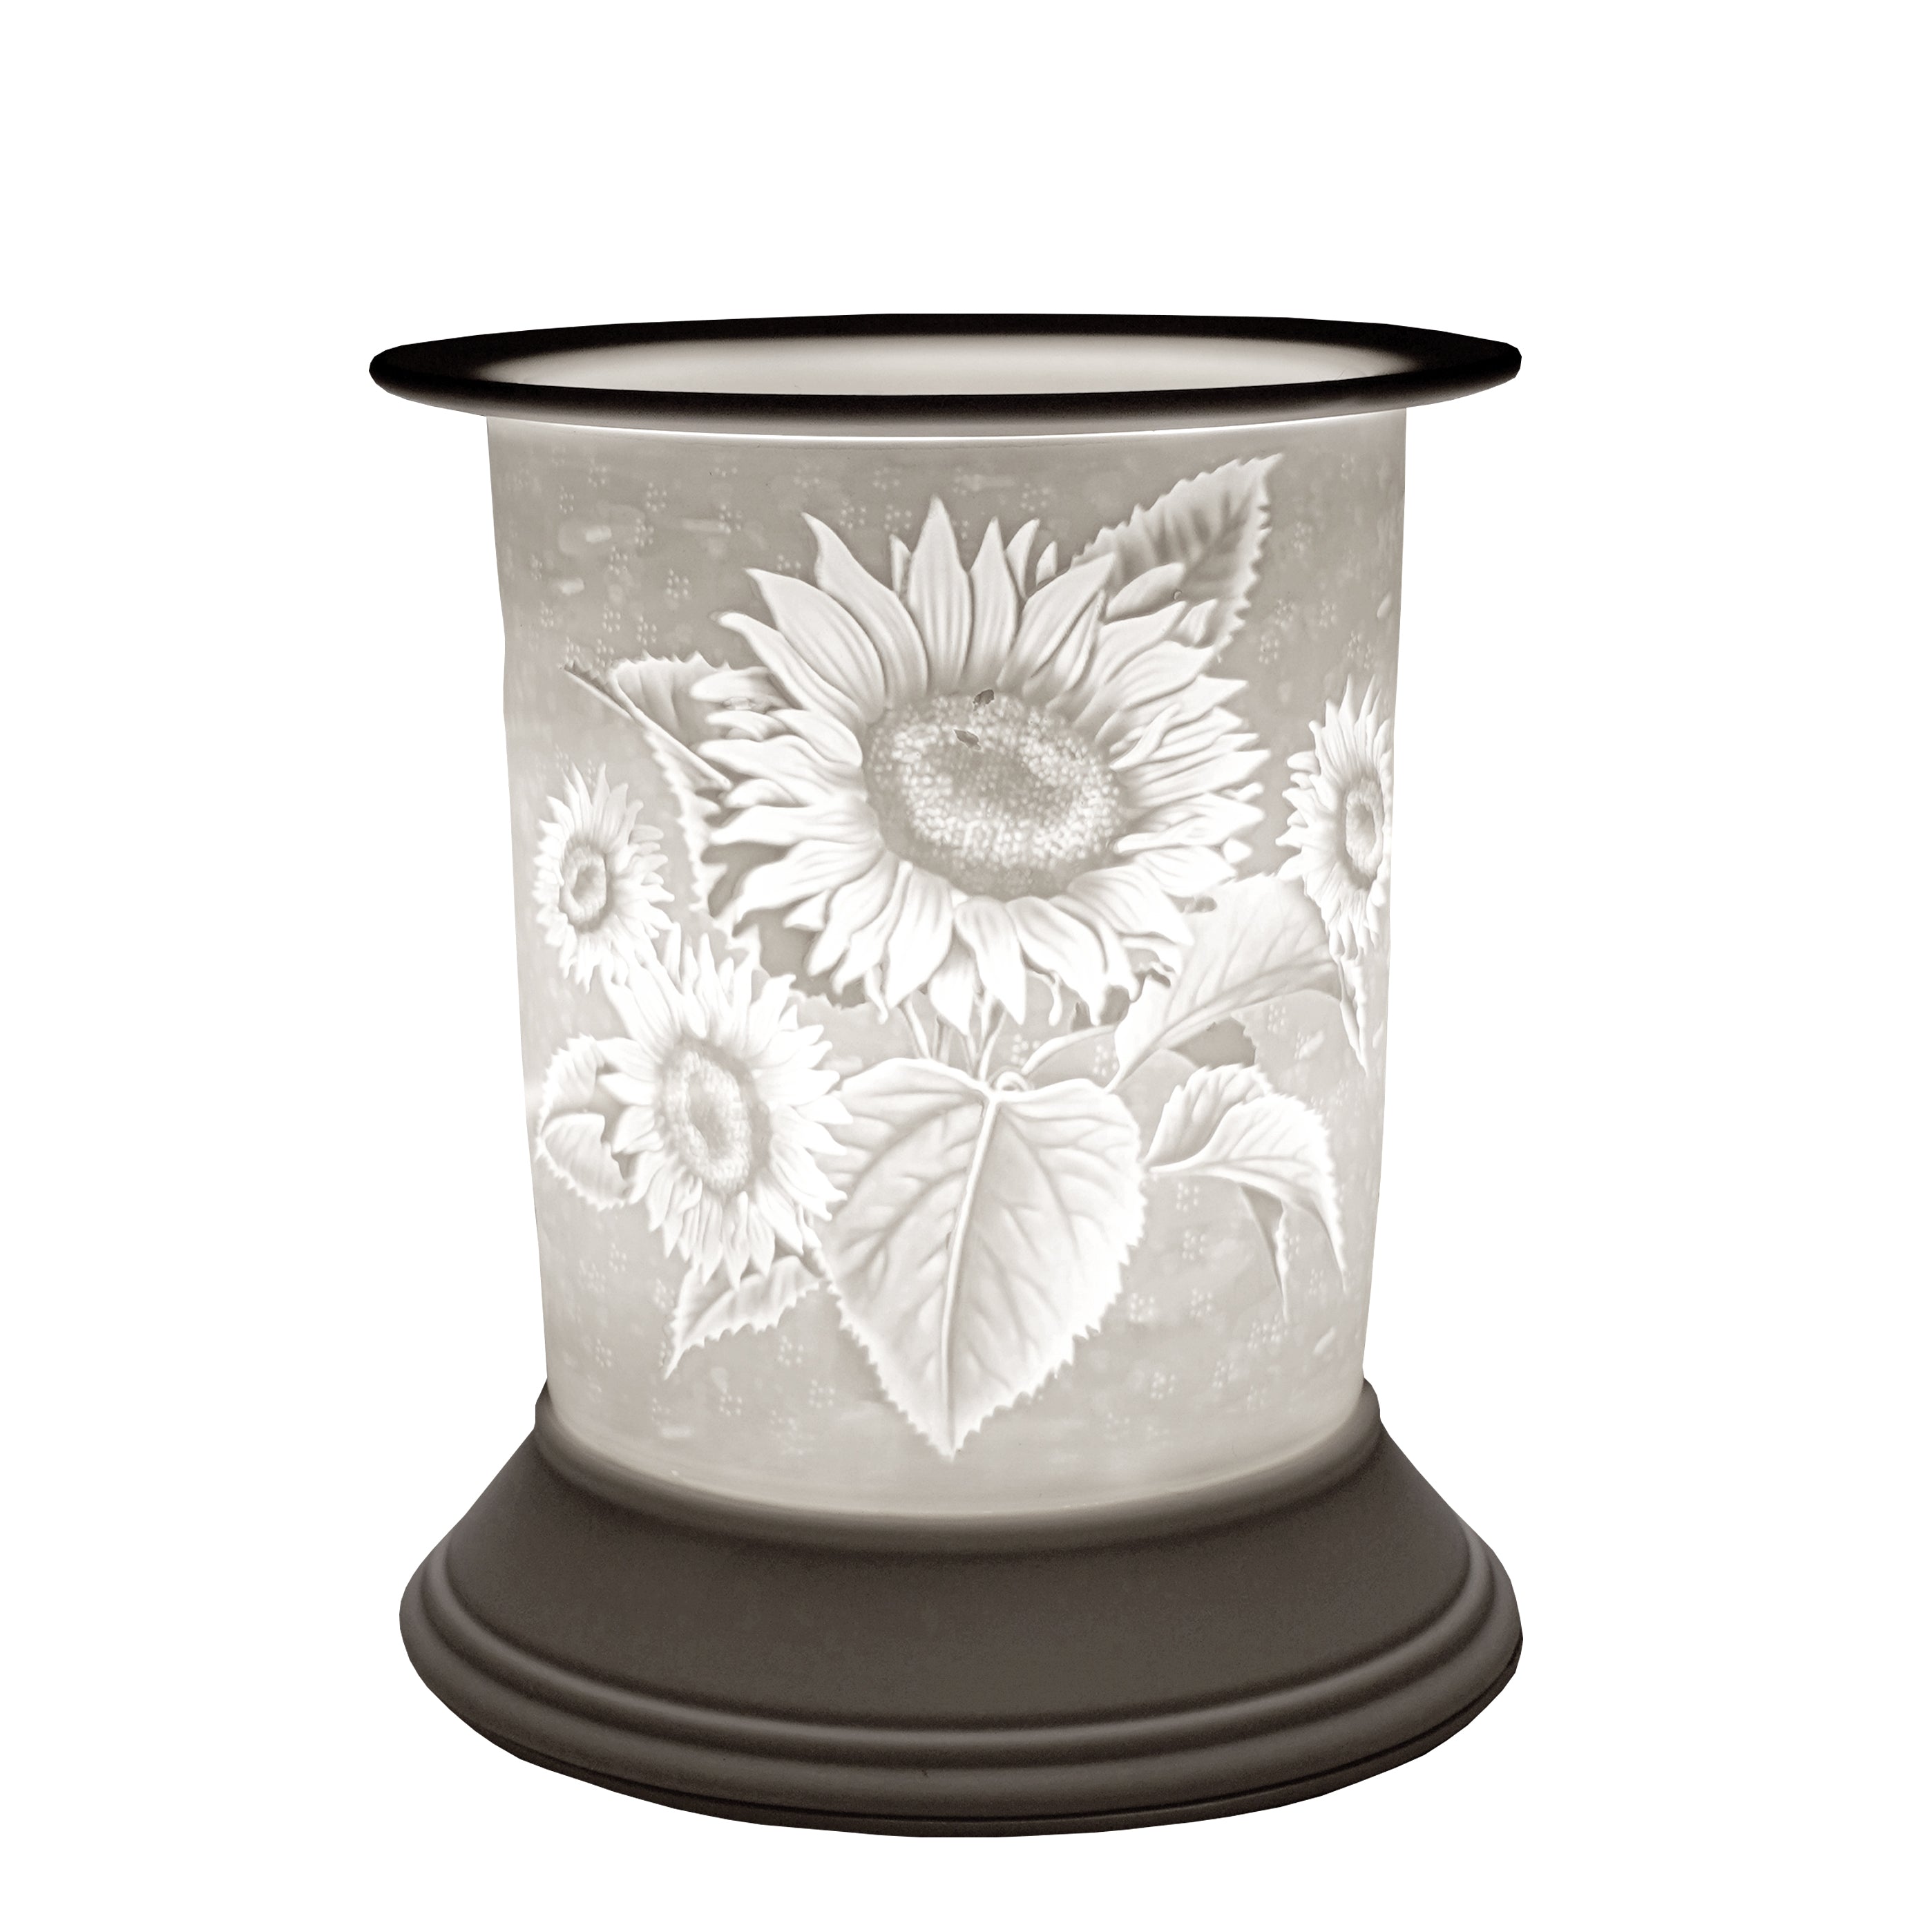 The porcelain material on this Wax Melt Burner allows bright light to shine through it, providing the opportunity to create this bright, warm Summer Time design. This is done by crafting images out of thicker and thinner sections of the porcelain, allowing for detailed shadowing and a 3D effect. The porcelains elegant look will fit perfectly in any room is available in a range of designs and two different shapes.